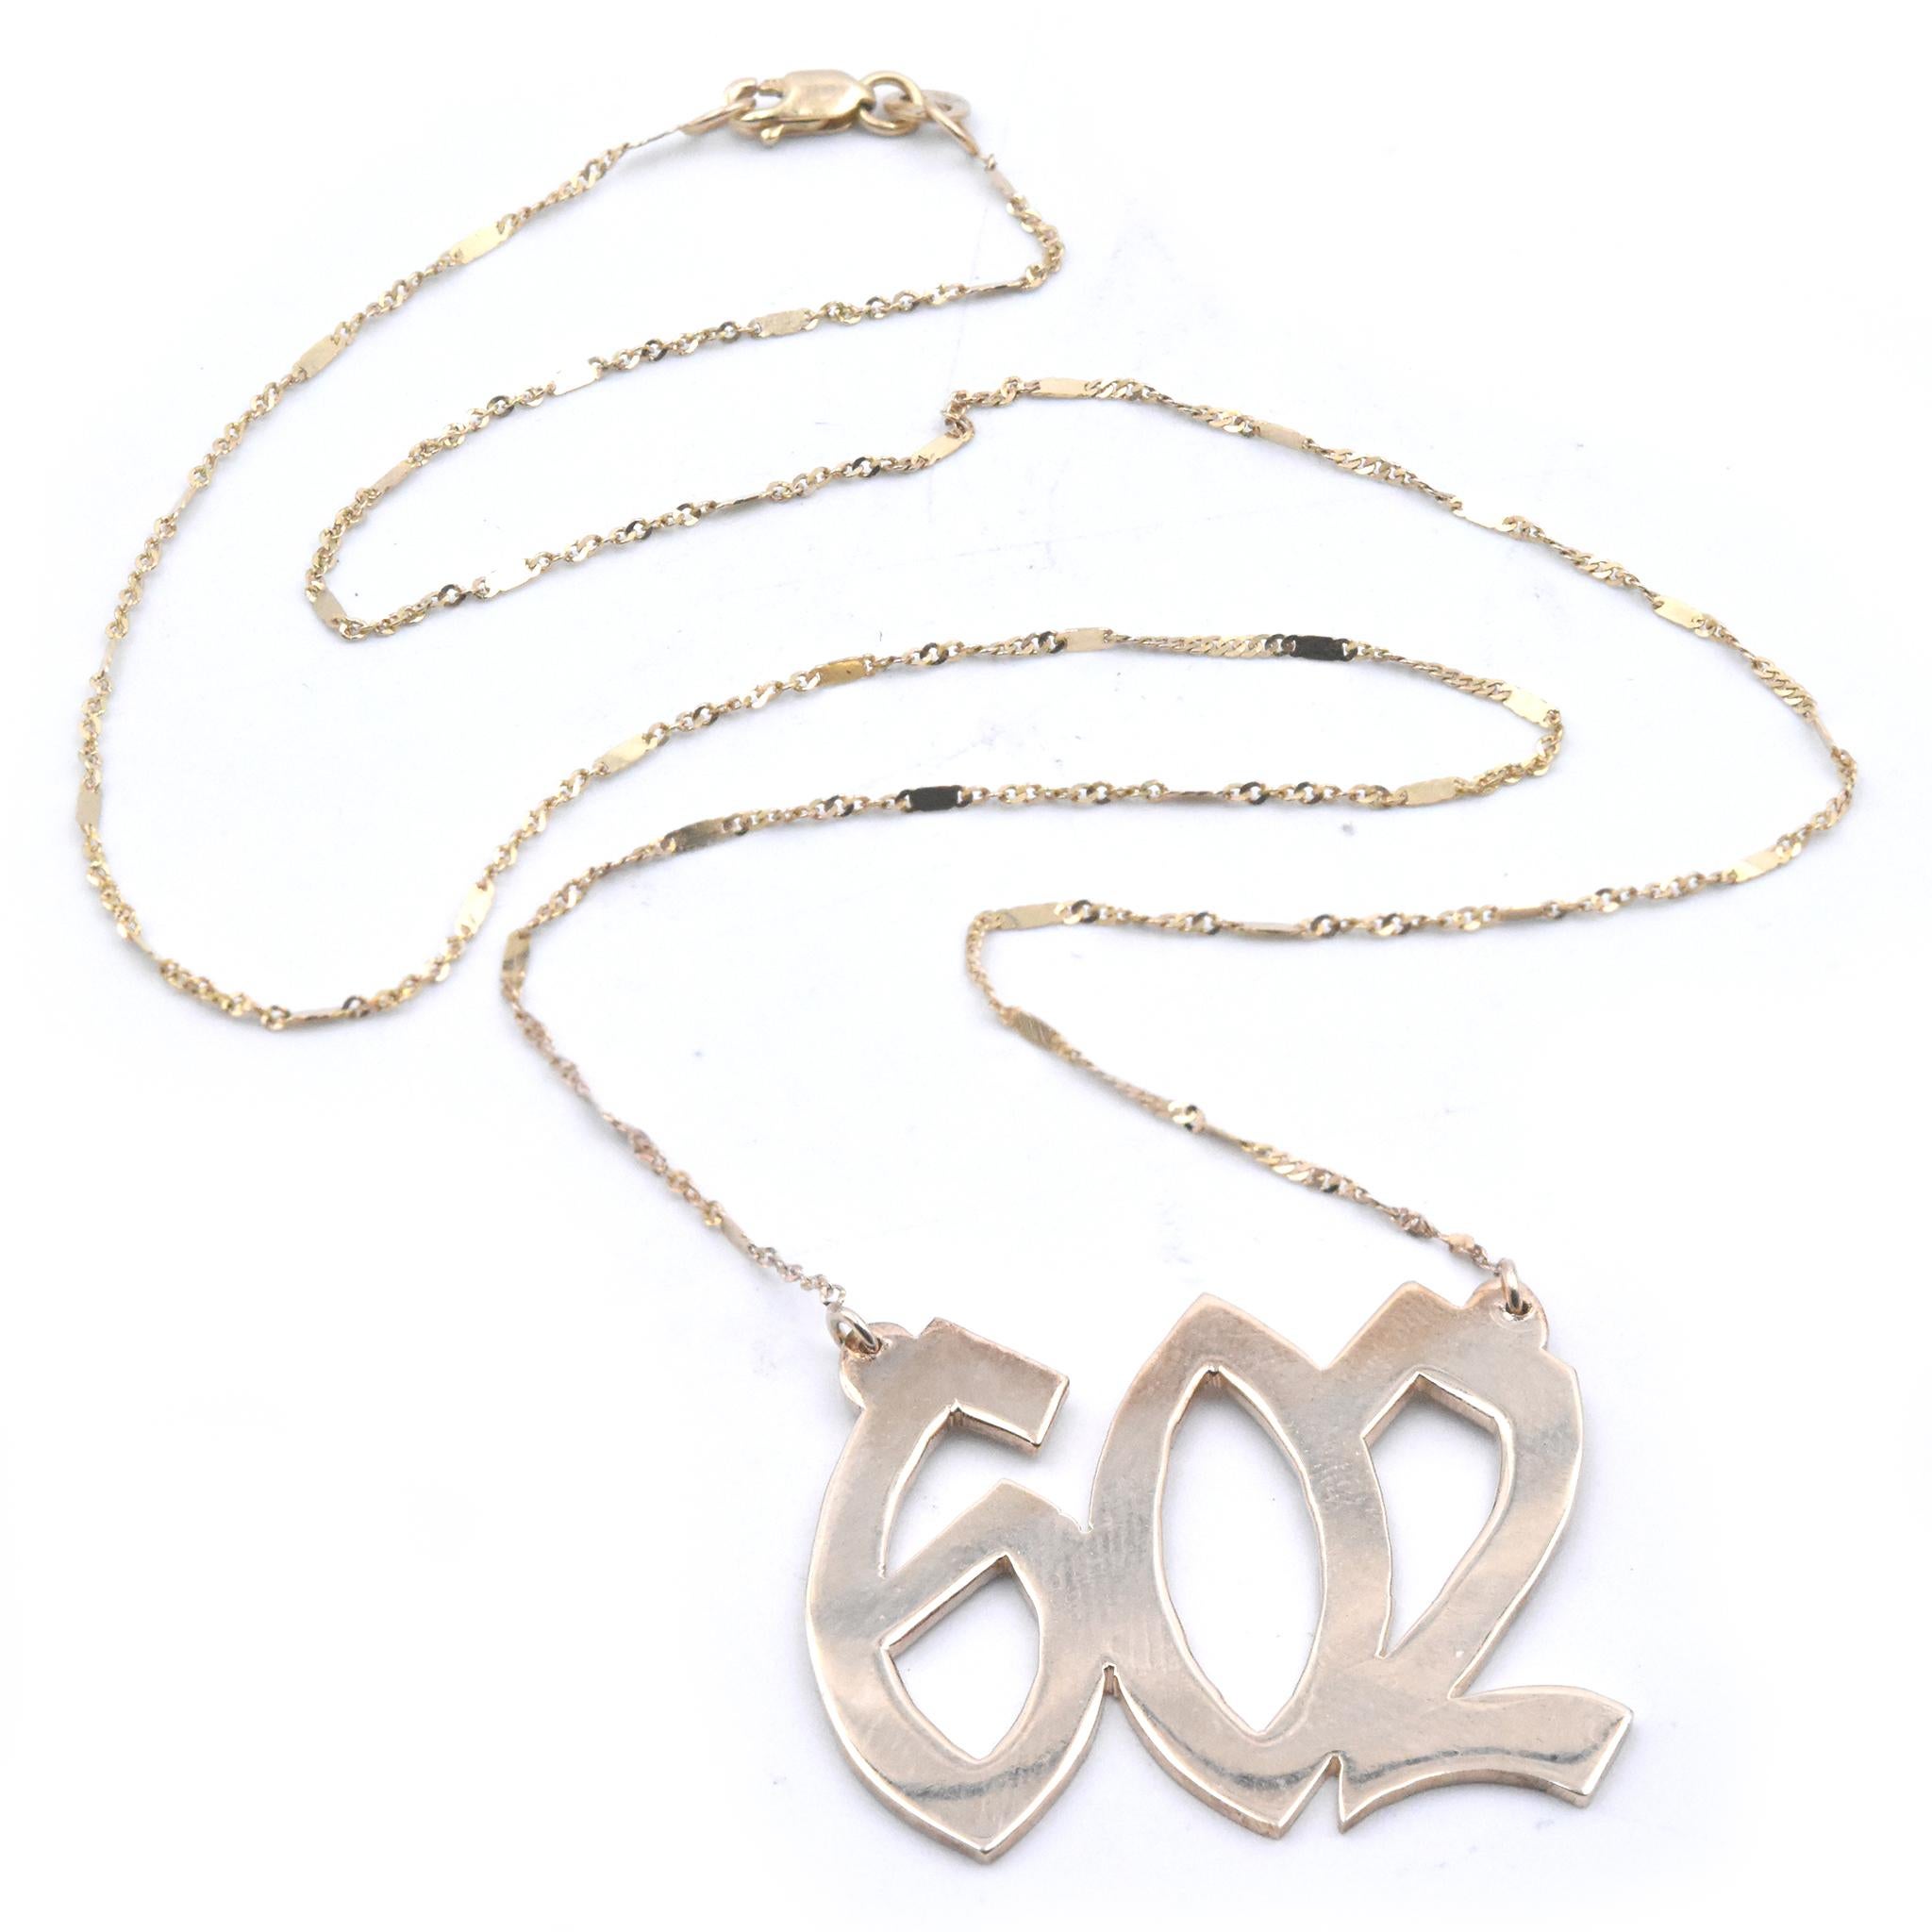 Designer: Custom Design
Material: 14k yellow gold
Dimensions: necklace measures 16-inches in length
Weight: 6.04 grams